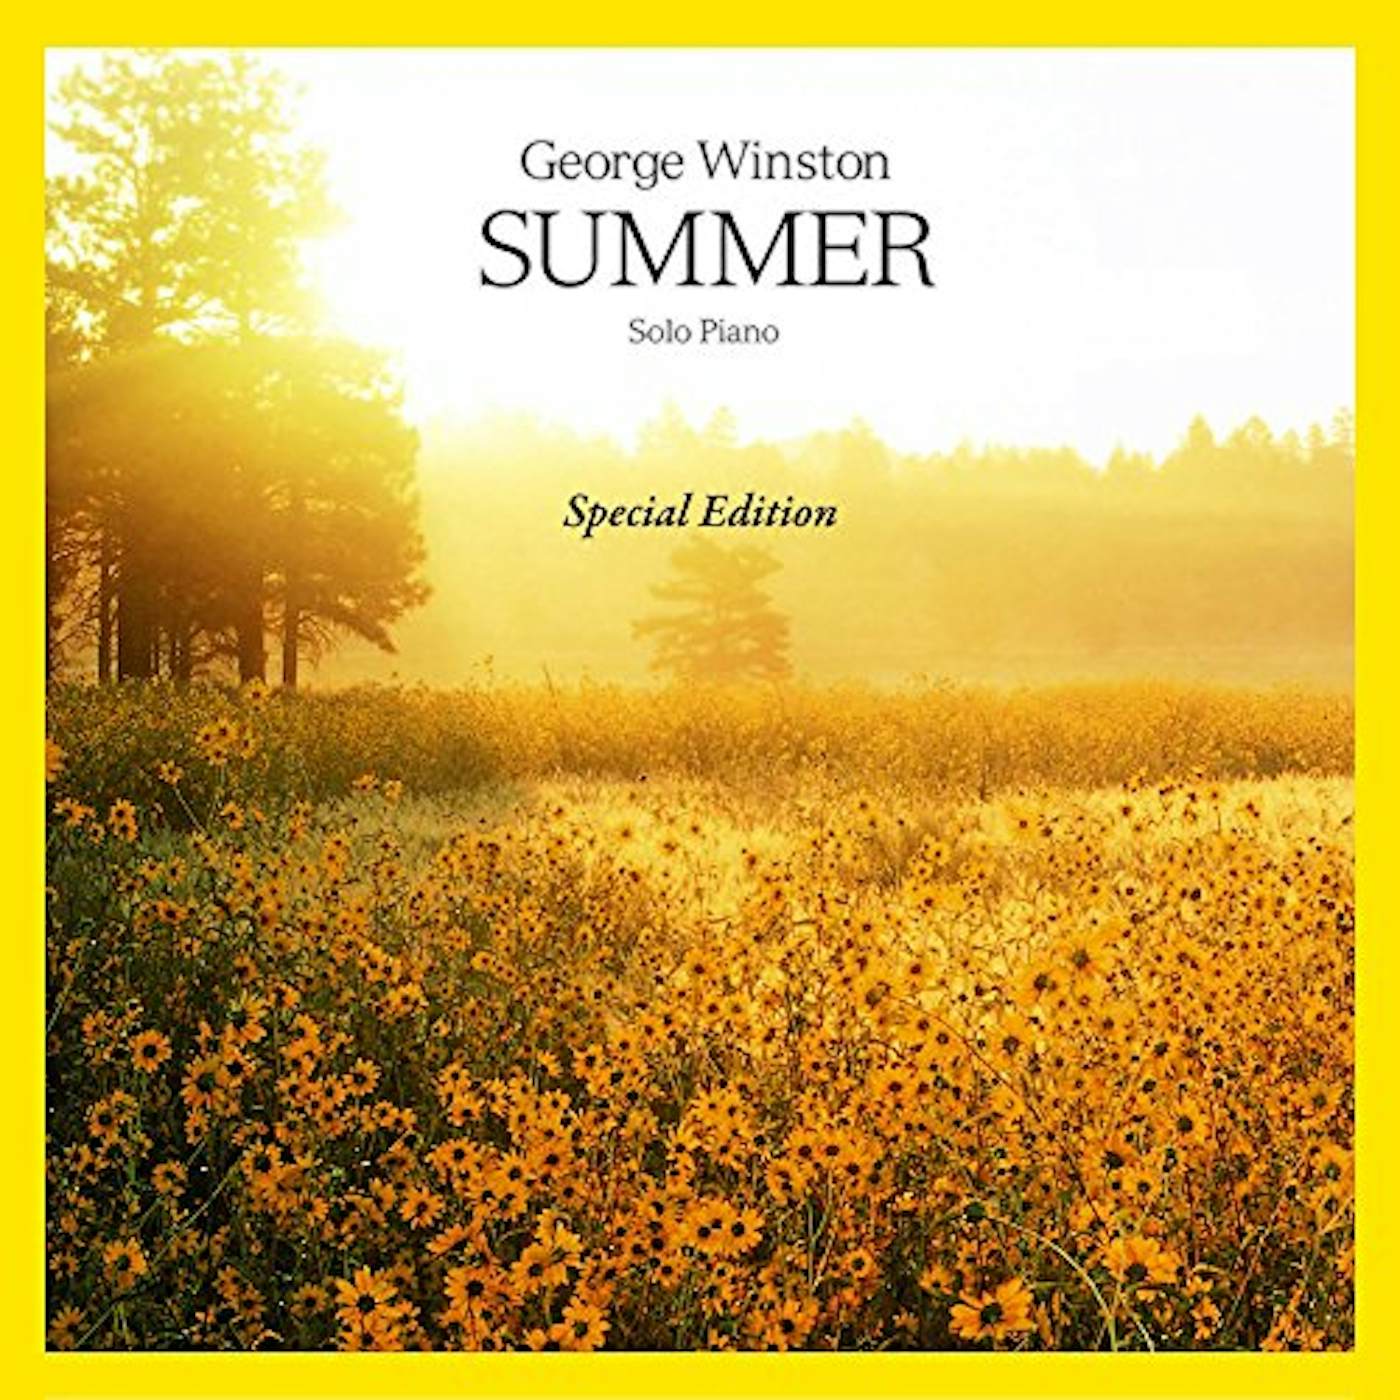 George Winston SUMMER: SPECIAL EDITION CD